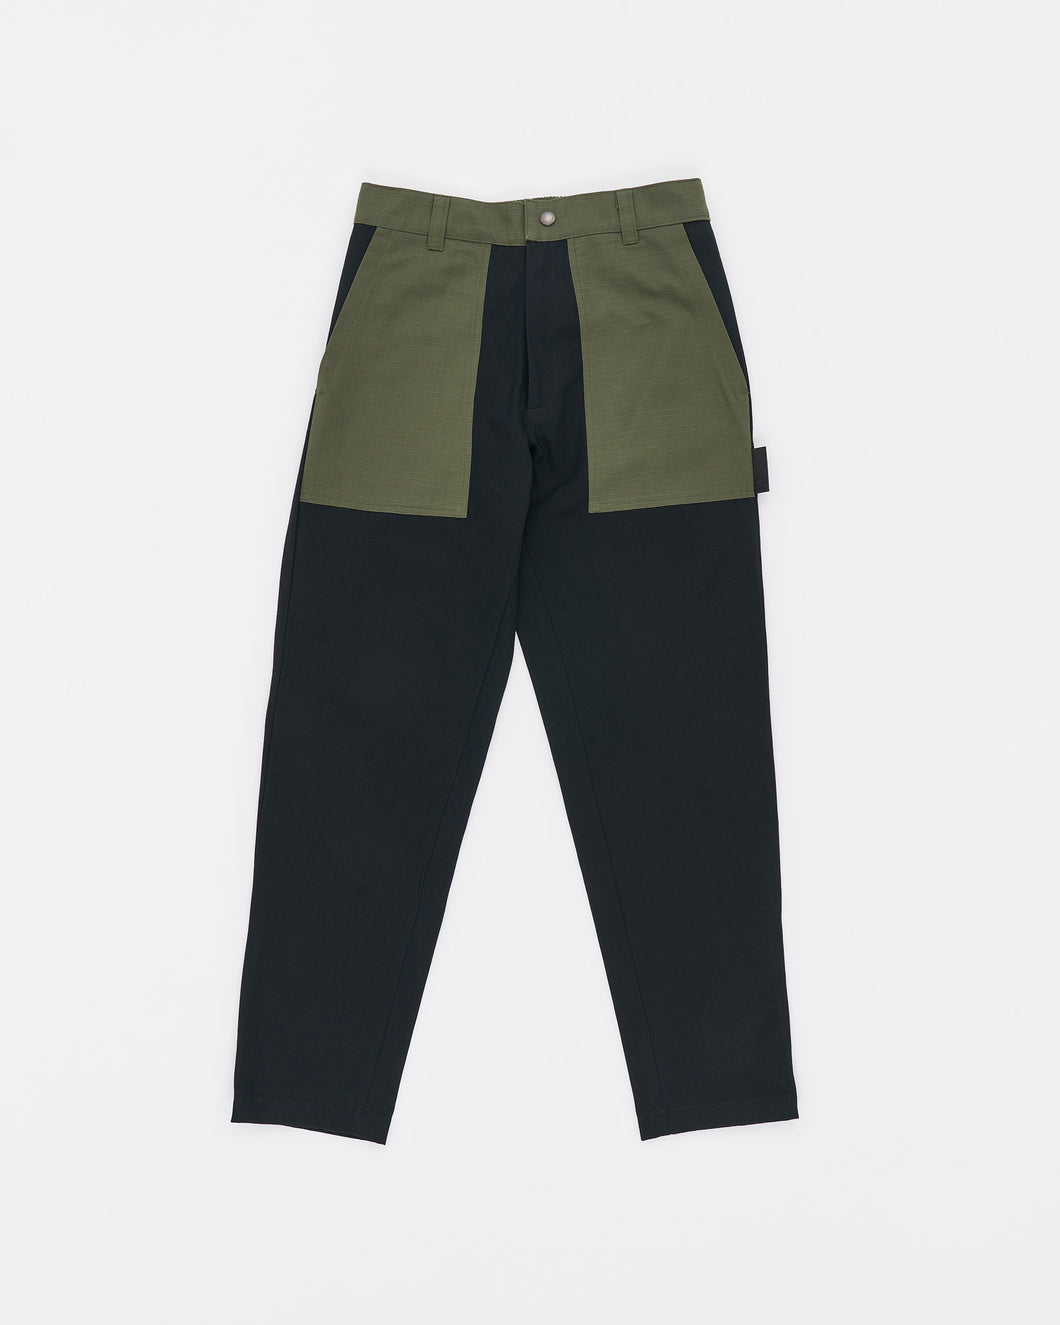 Black Military Cropped Pants